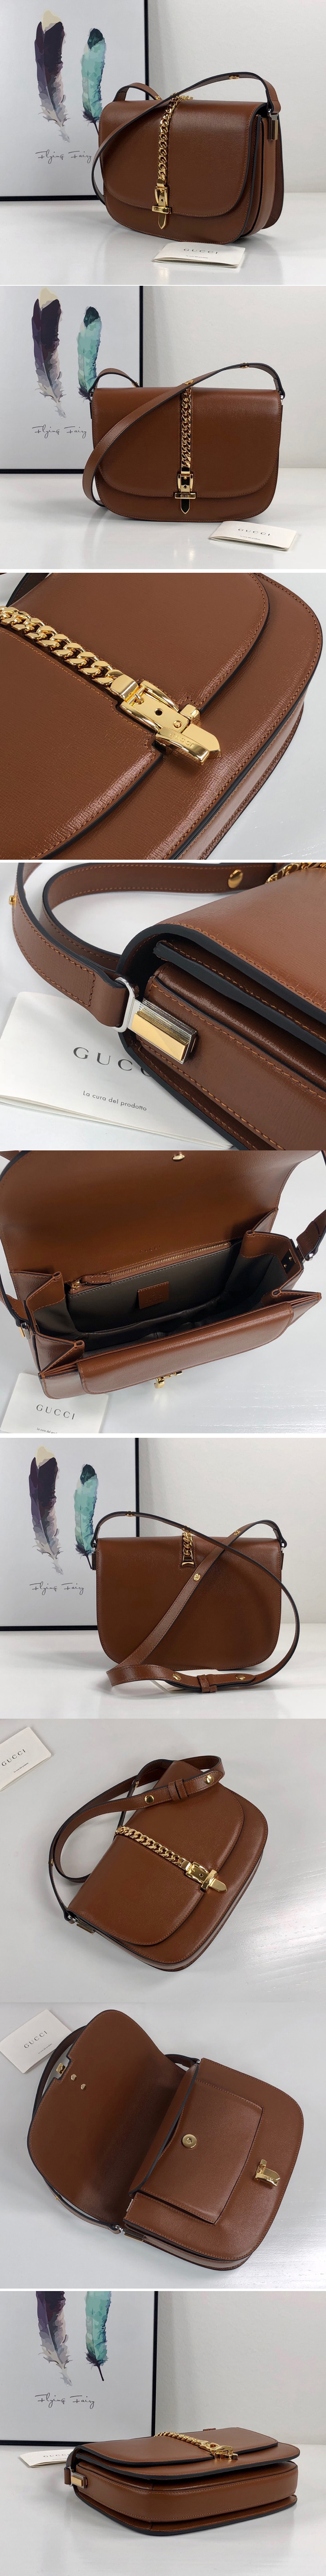 Replica Gucci 601067 Sylvie 1969 small shoulder bag in Brown Leather